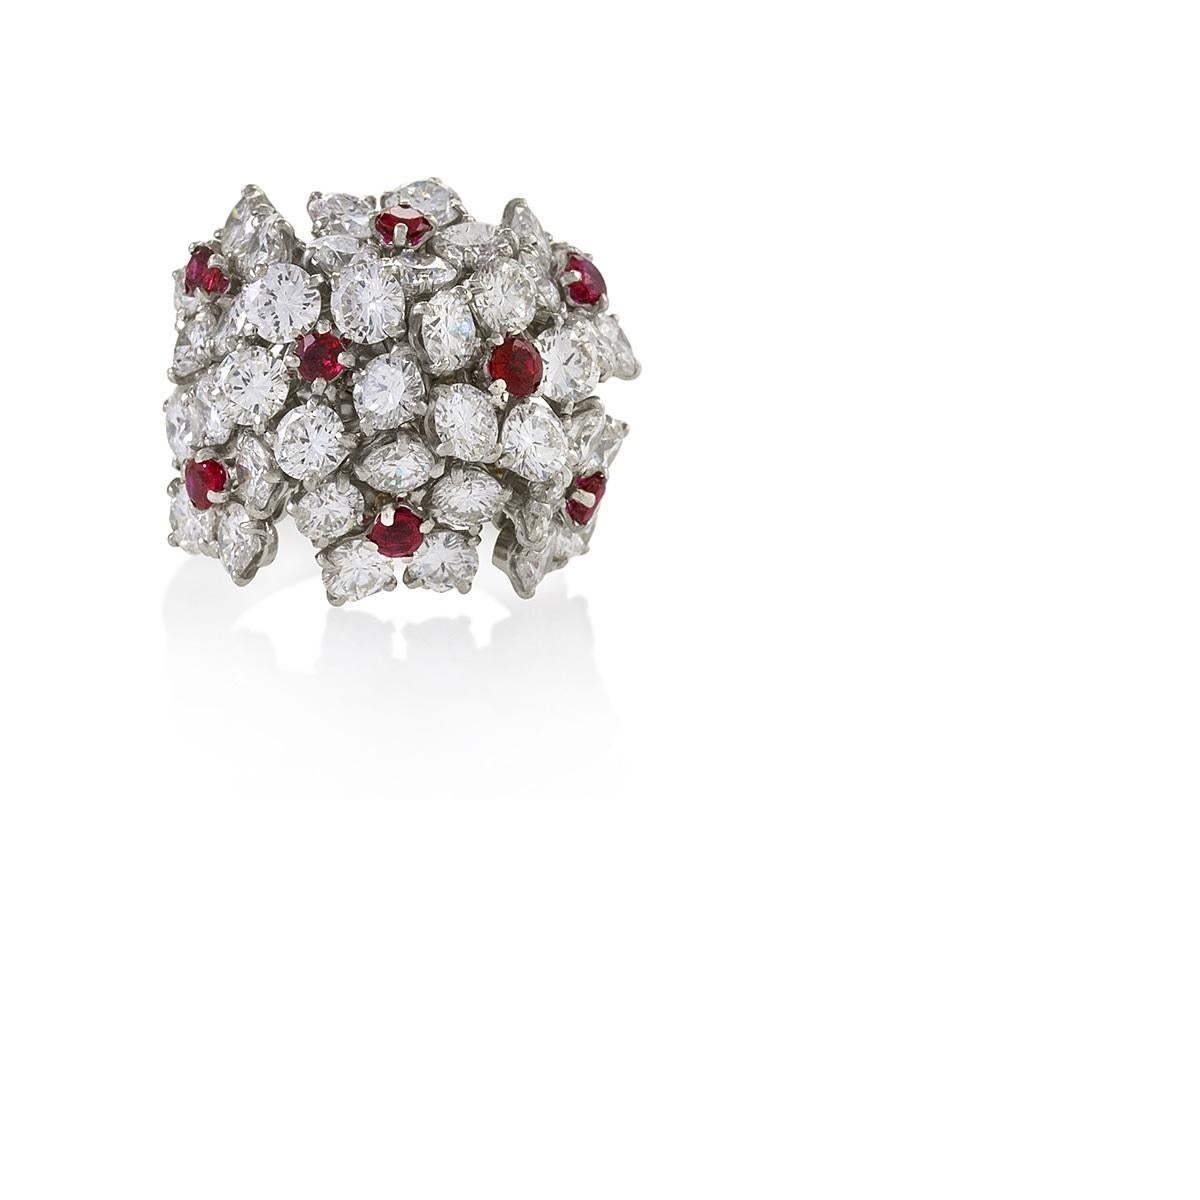 An American platinum ring with diamonds and rubies by Van Cleef & Arpels. The ring has 40 round brilliant-cut diamonds with an approximate total weight of 6.00 carats,with 8 round rubies with the approximate total weight of .80 carat as an accent of